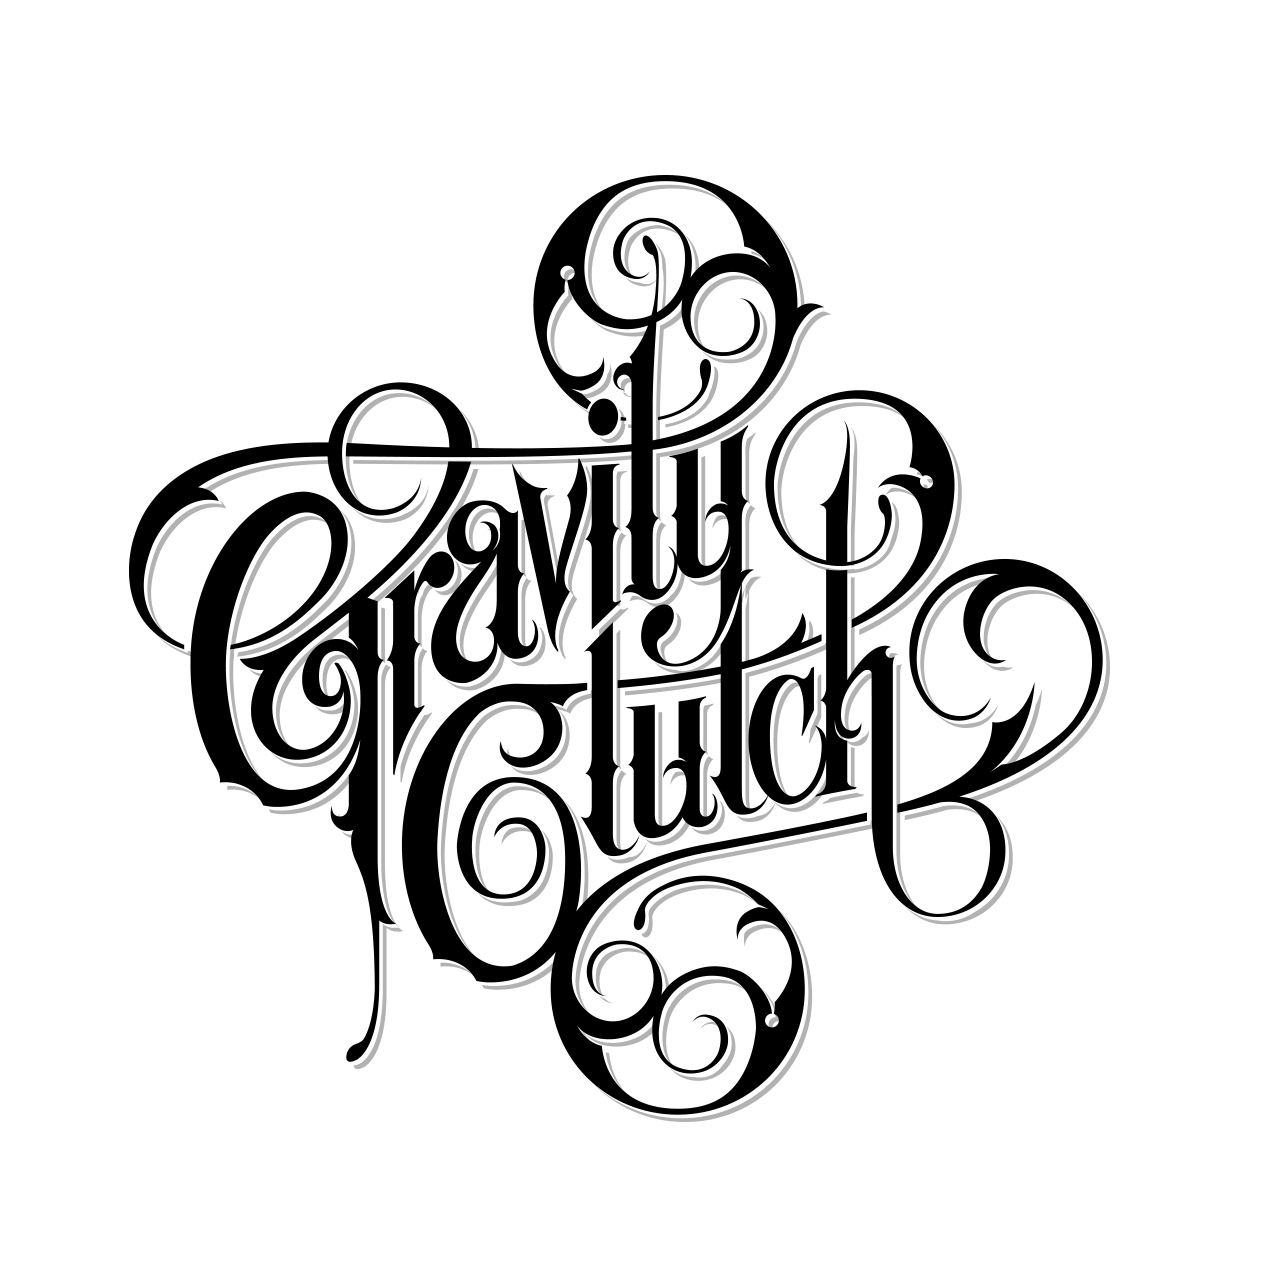 Logotype for Gravity Clutch ornate letters